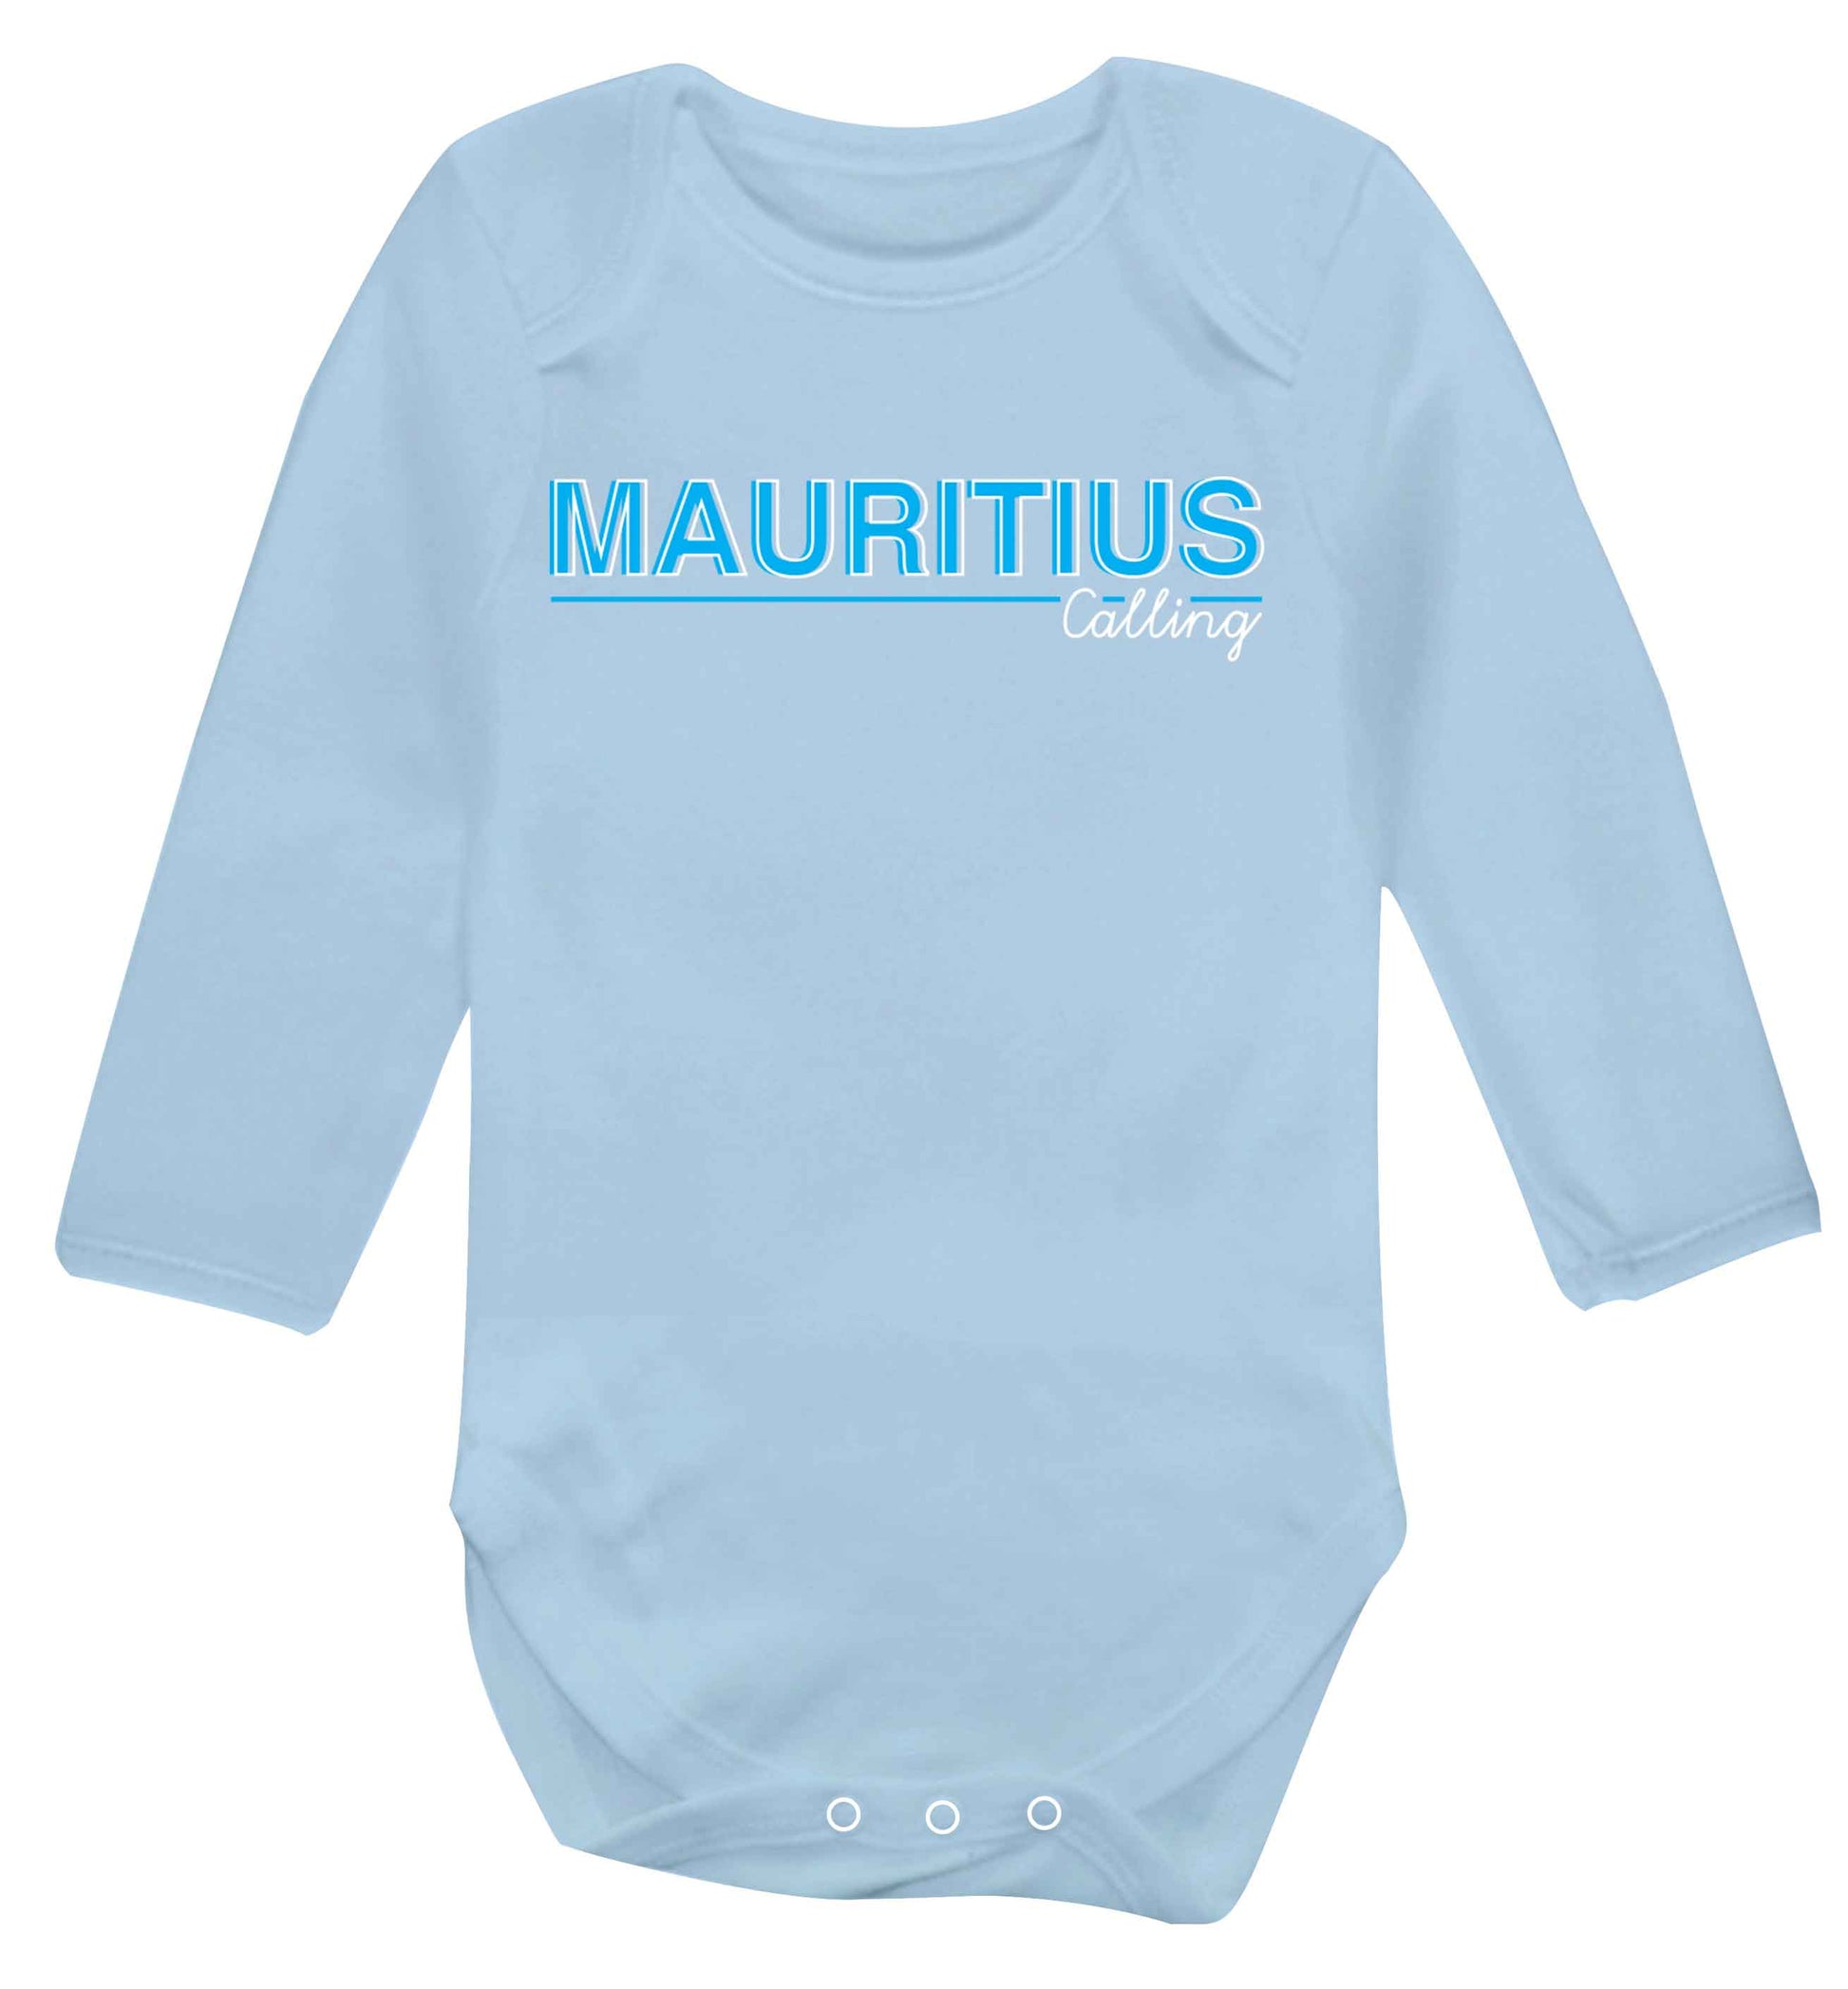 Mauritius calling Baby Vest long sleeved pale blue 6-12 months